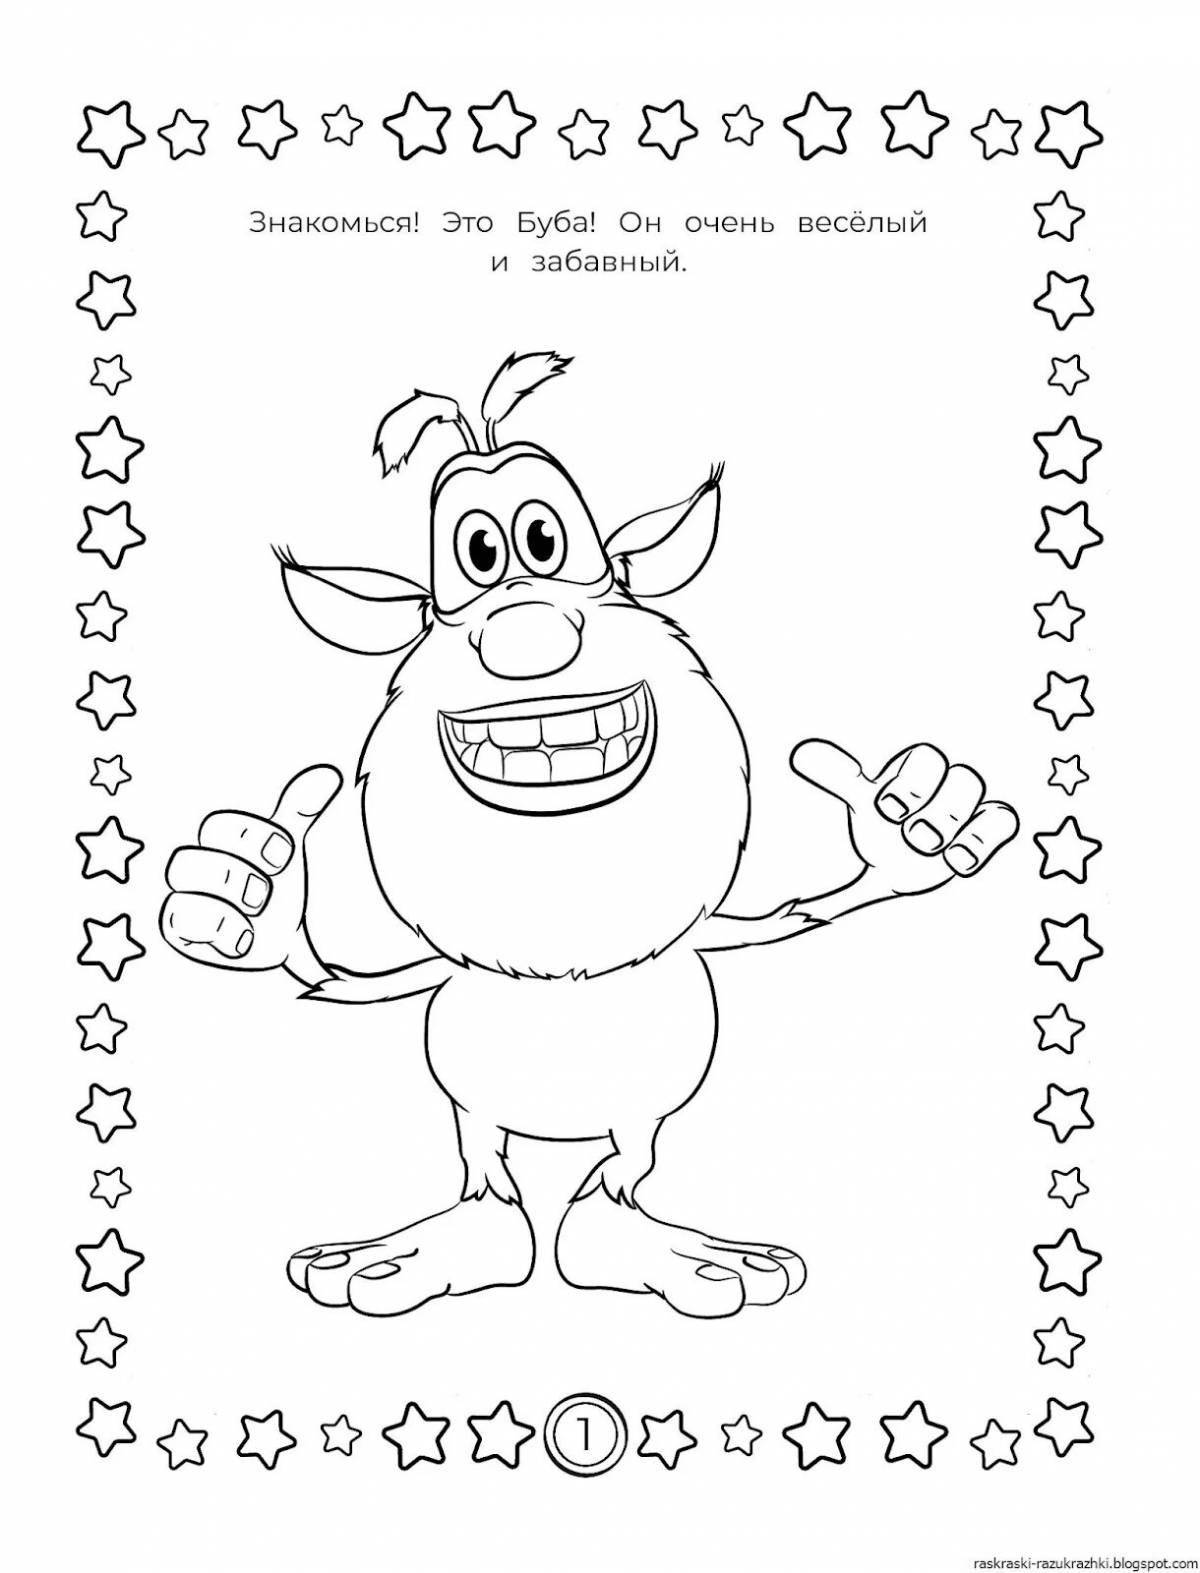 Booba worm coloring page